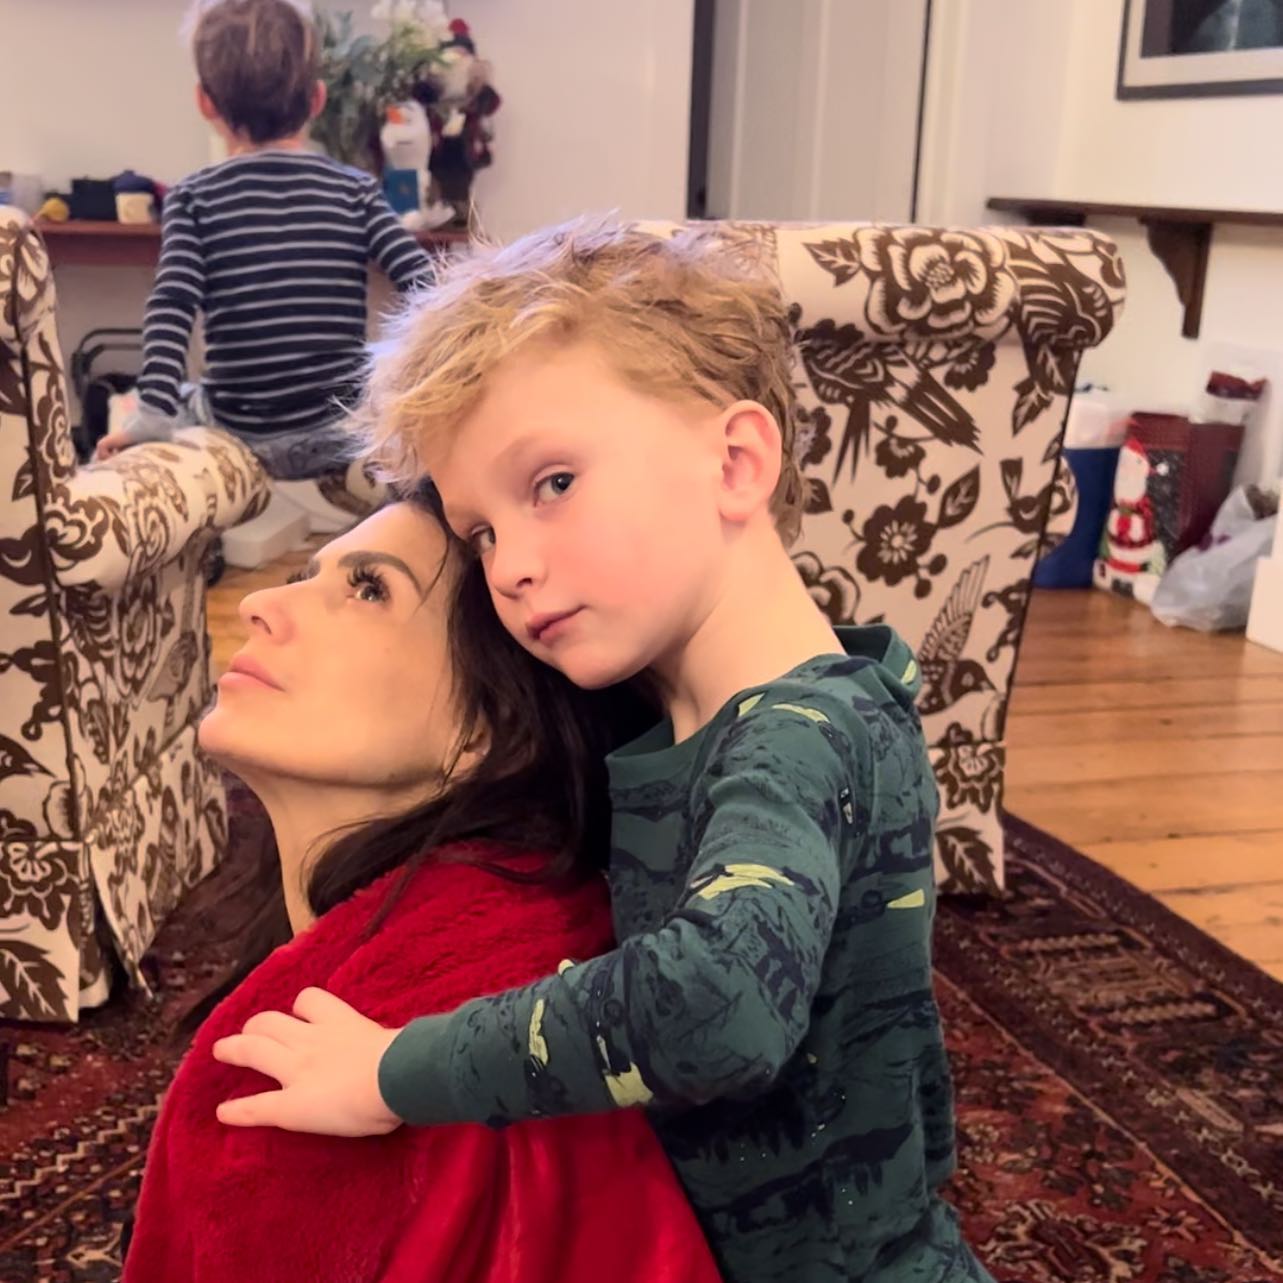 Alec Baldwin posts a photo of his wife and son